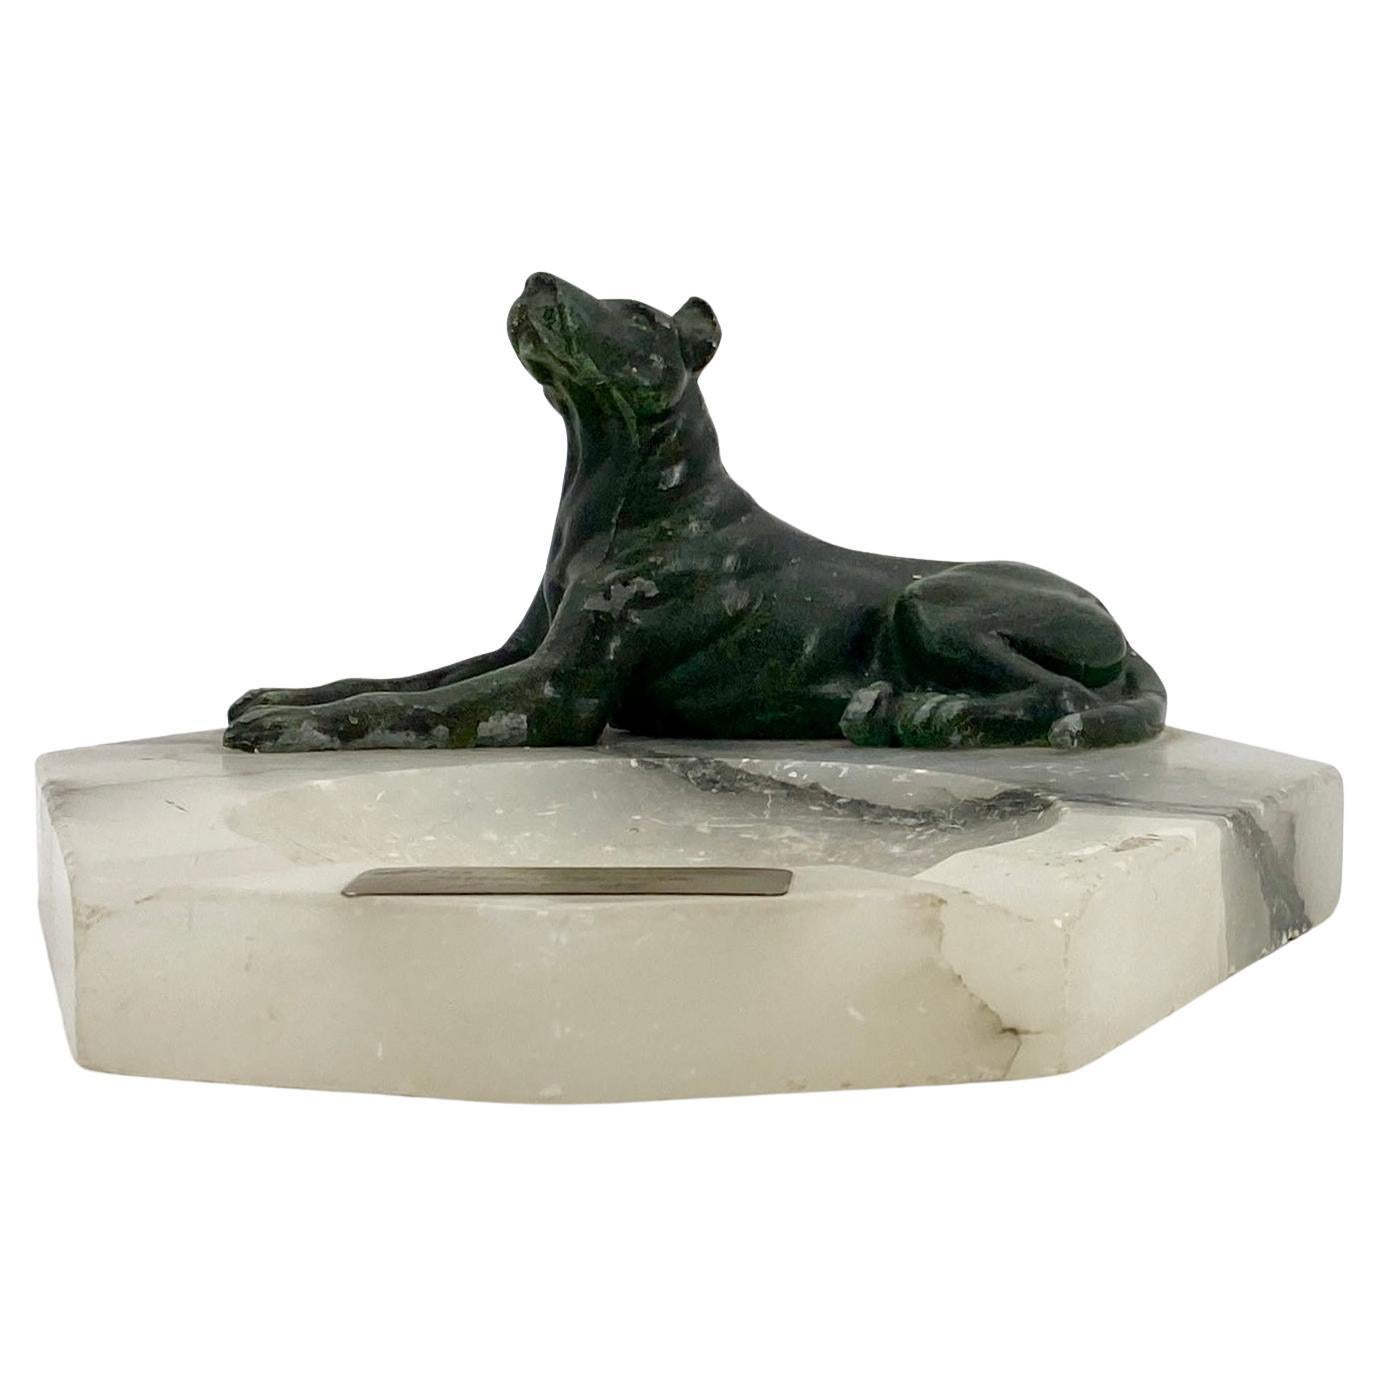 Vintage Danish midcentury white agate dog ashtray.
The marble ashtray has a green painted metal dog and a signed brass plaques dated 1948.
 